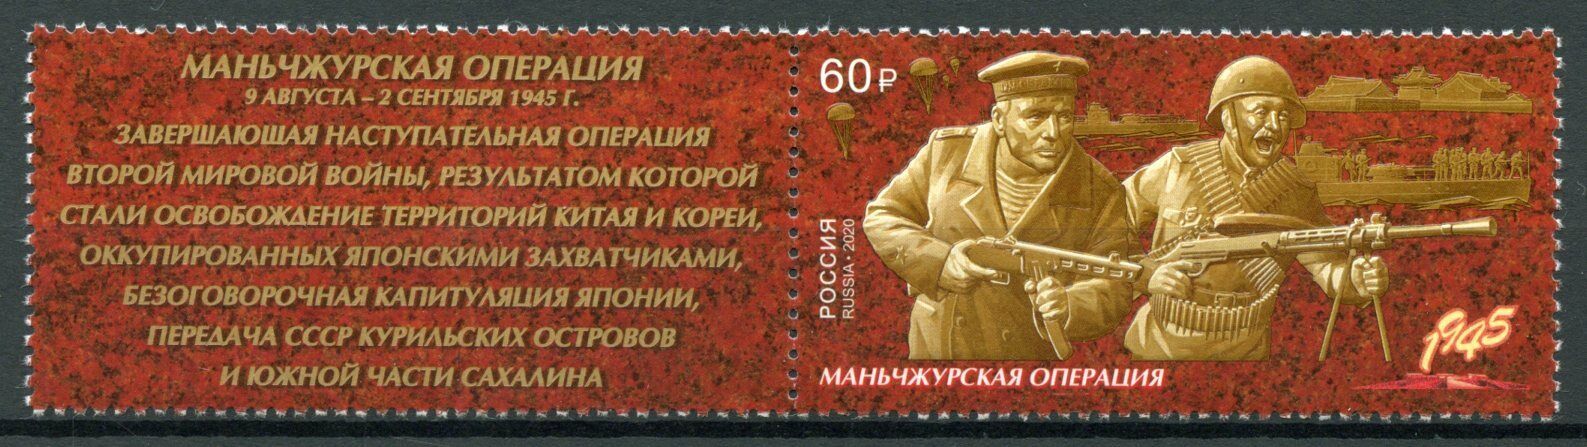 Russia Military Stamps 2020 MNH WWII WW2 Manchurian Operation 1v Set + Label